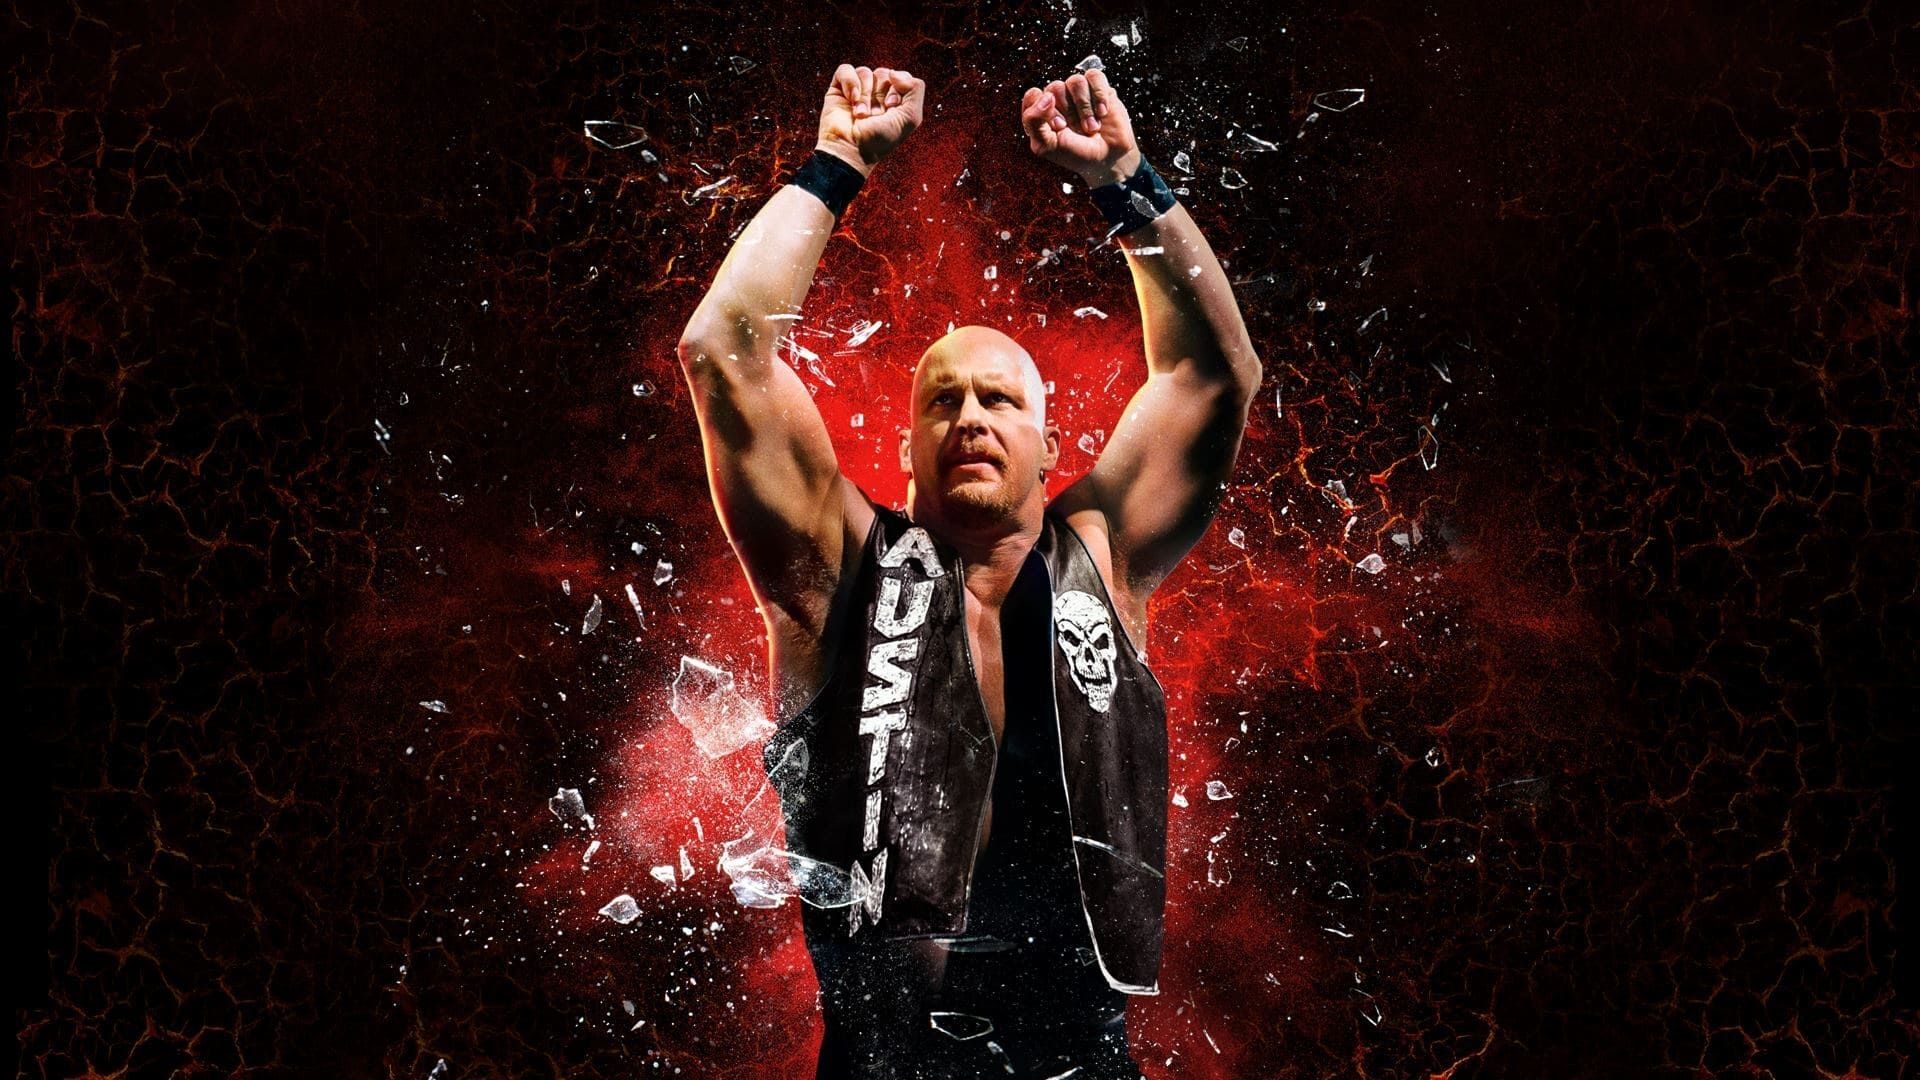 Meeting Stone Cold background